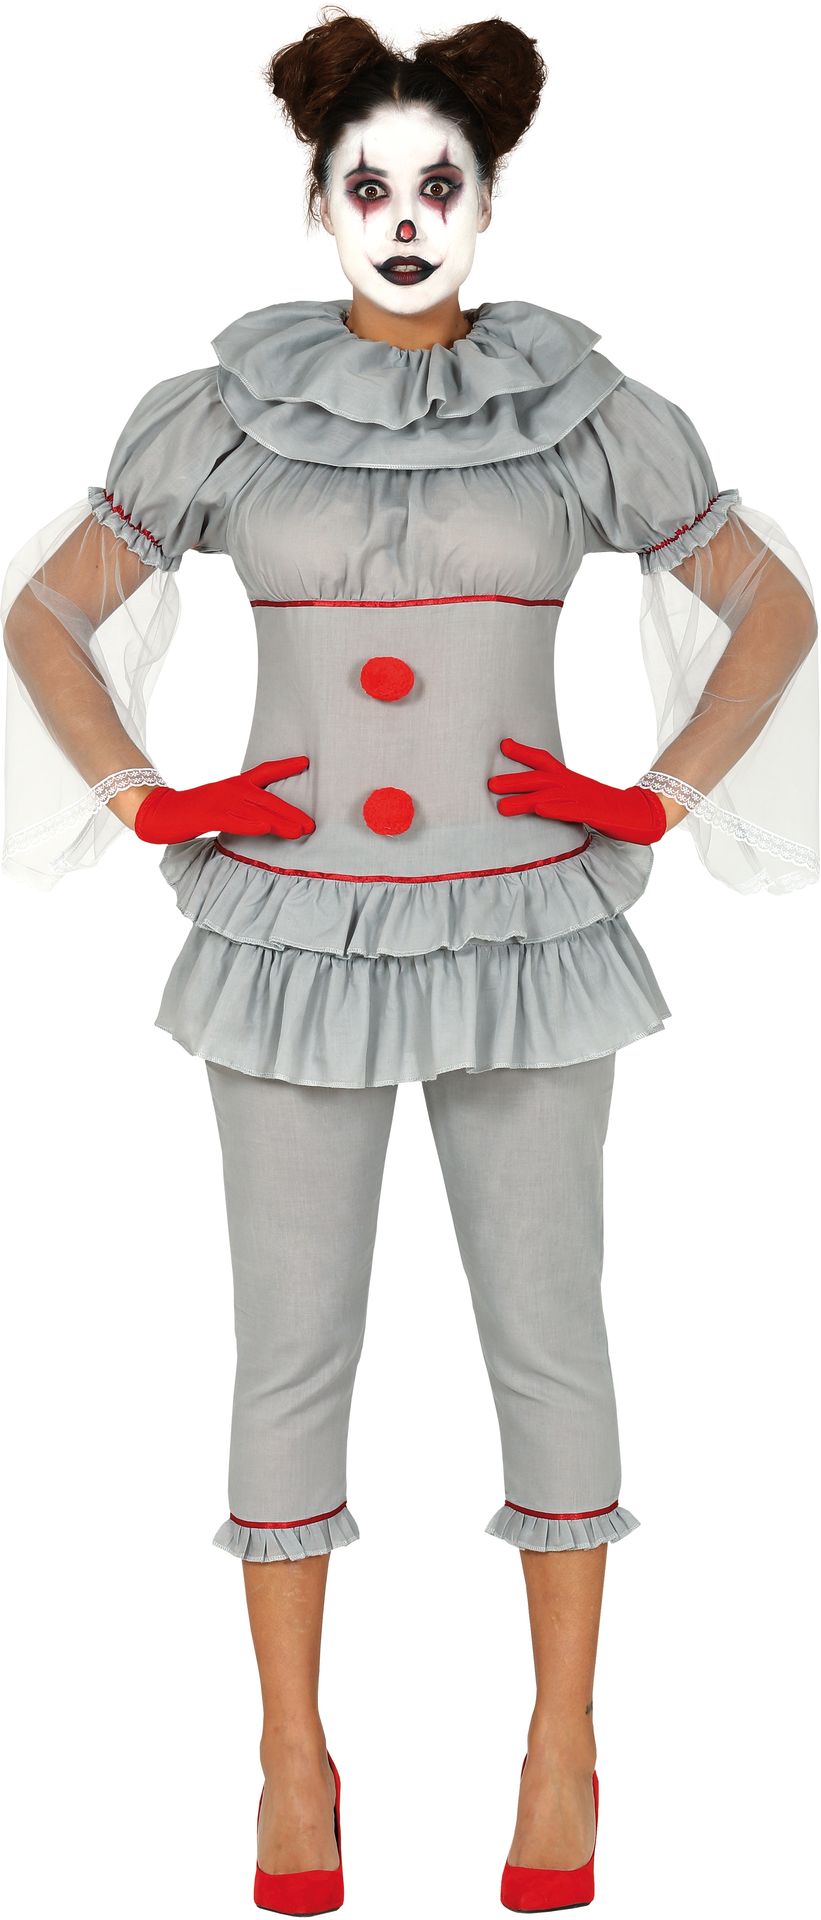 It clown outfit